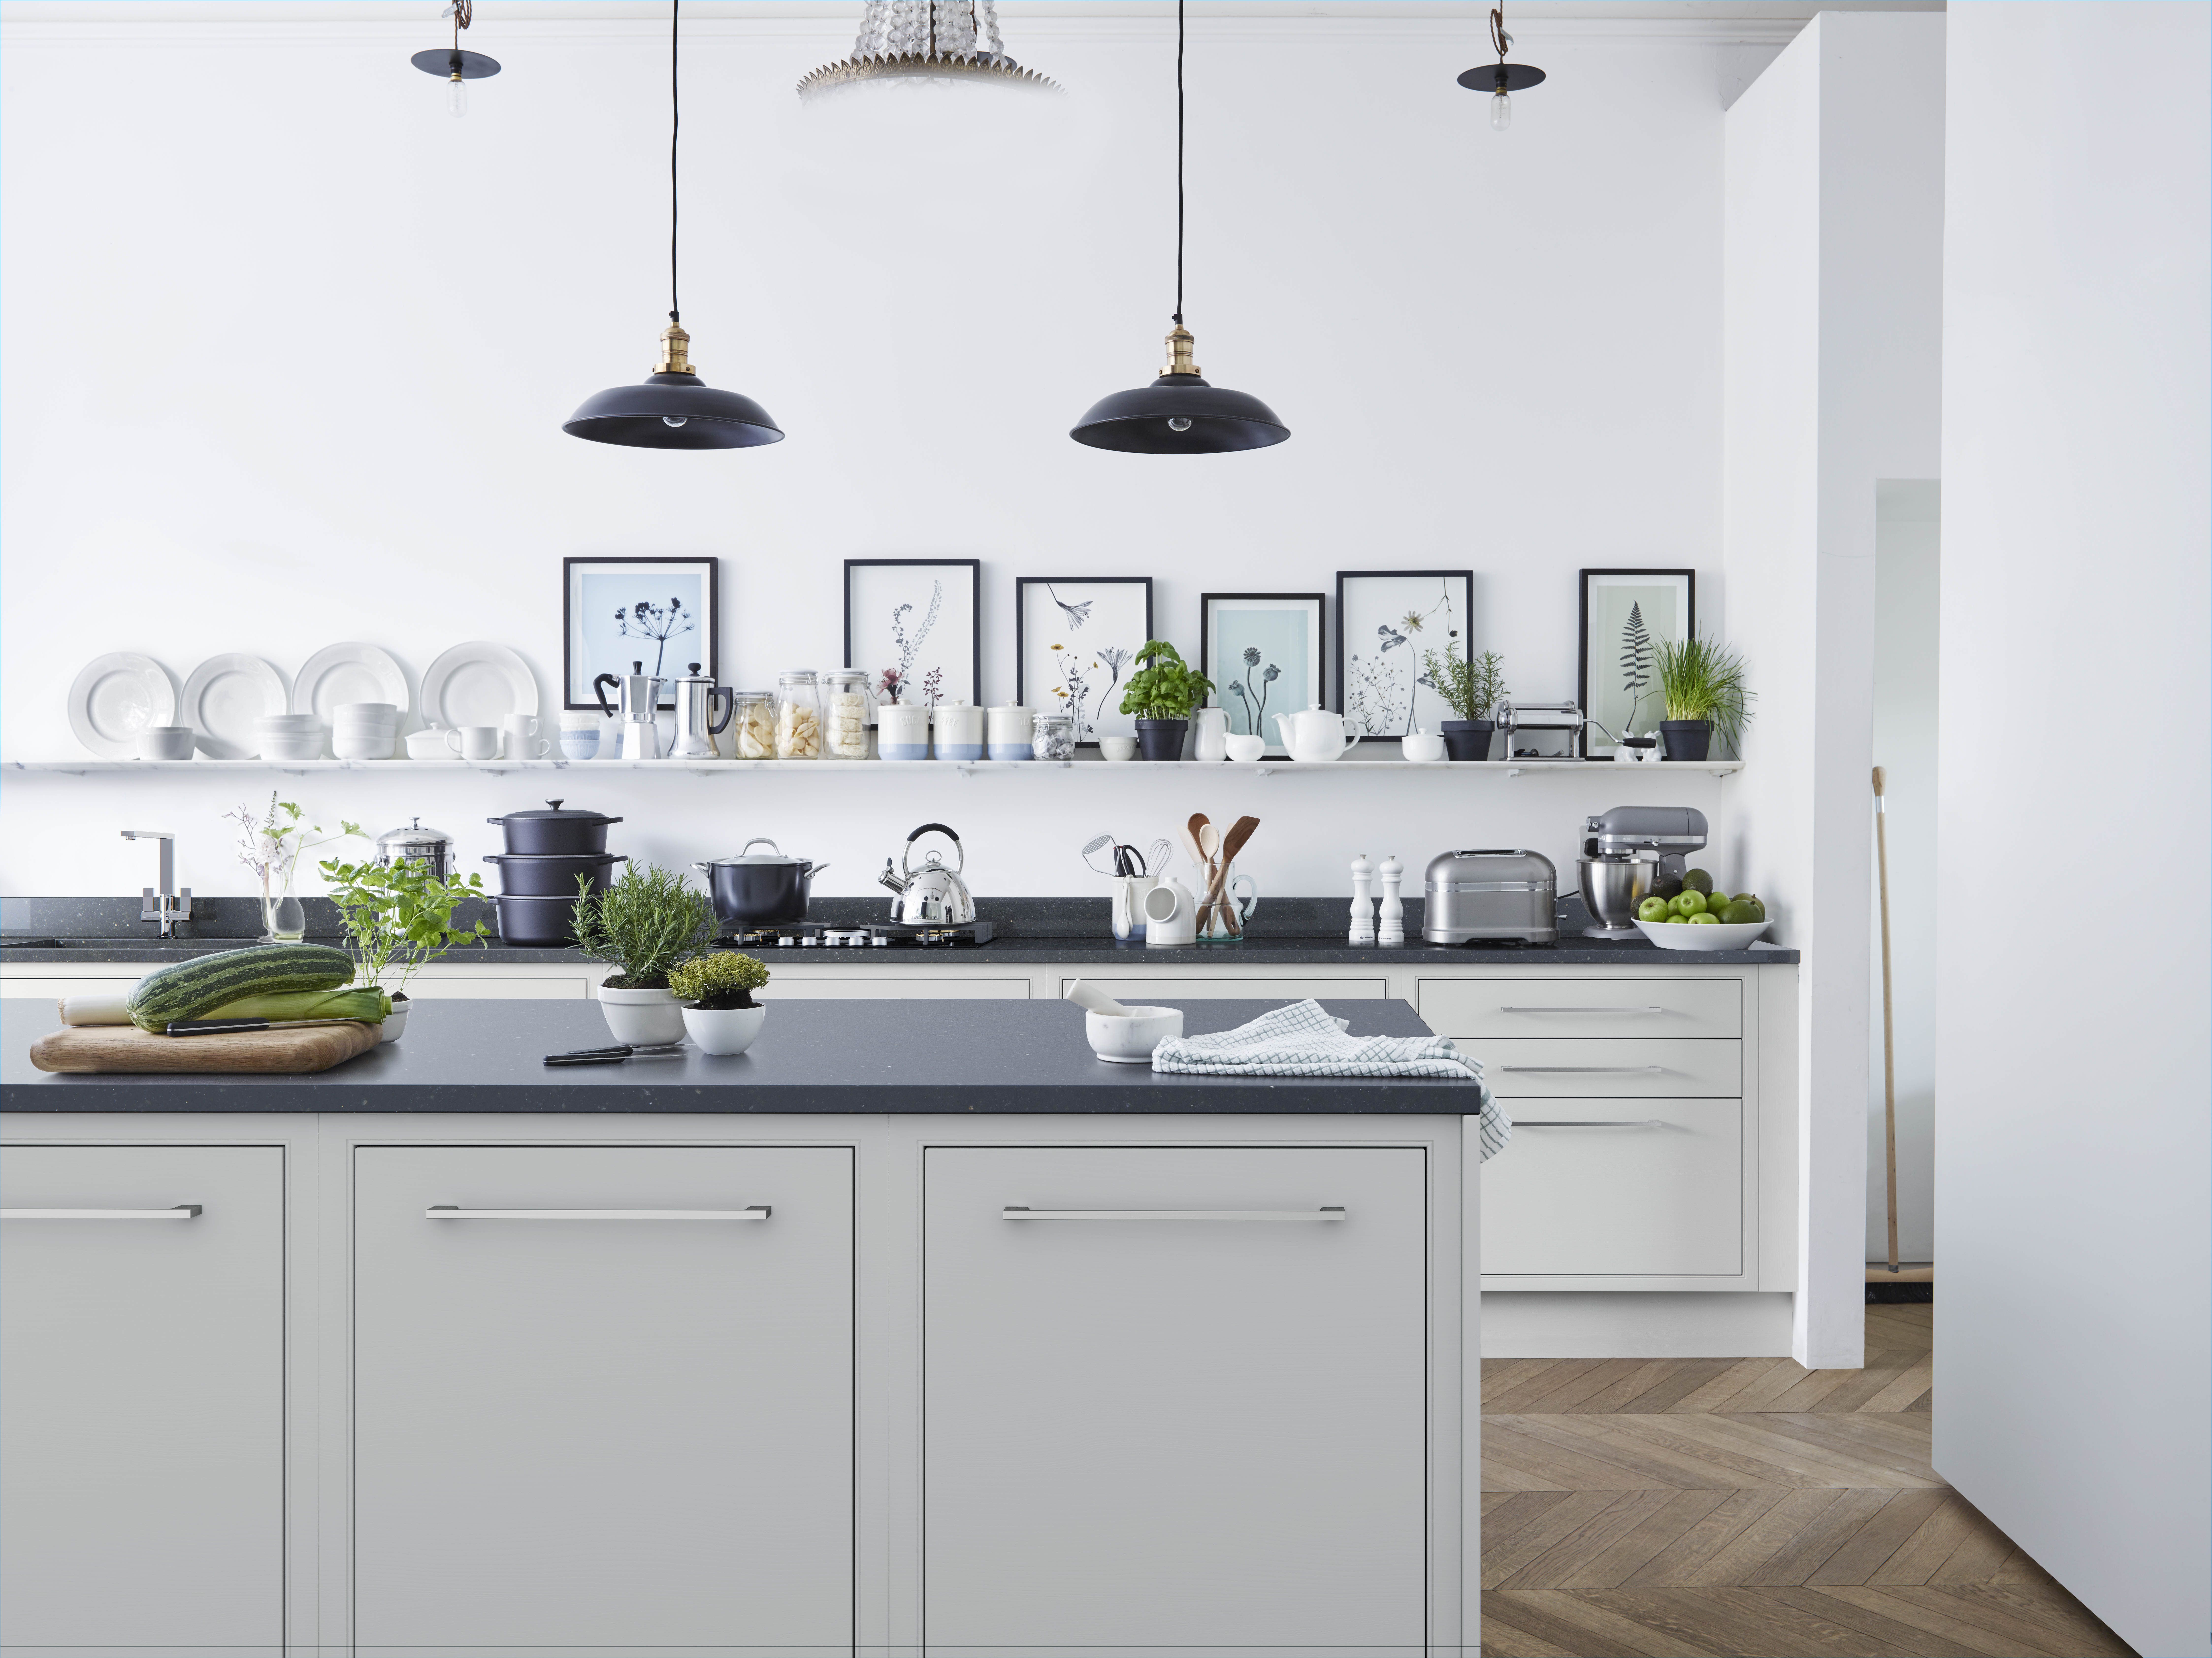 10 Best Kitchen Trends And Habits Of 2017 As Revealed By John